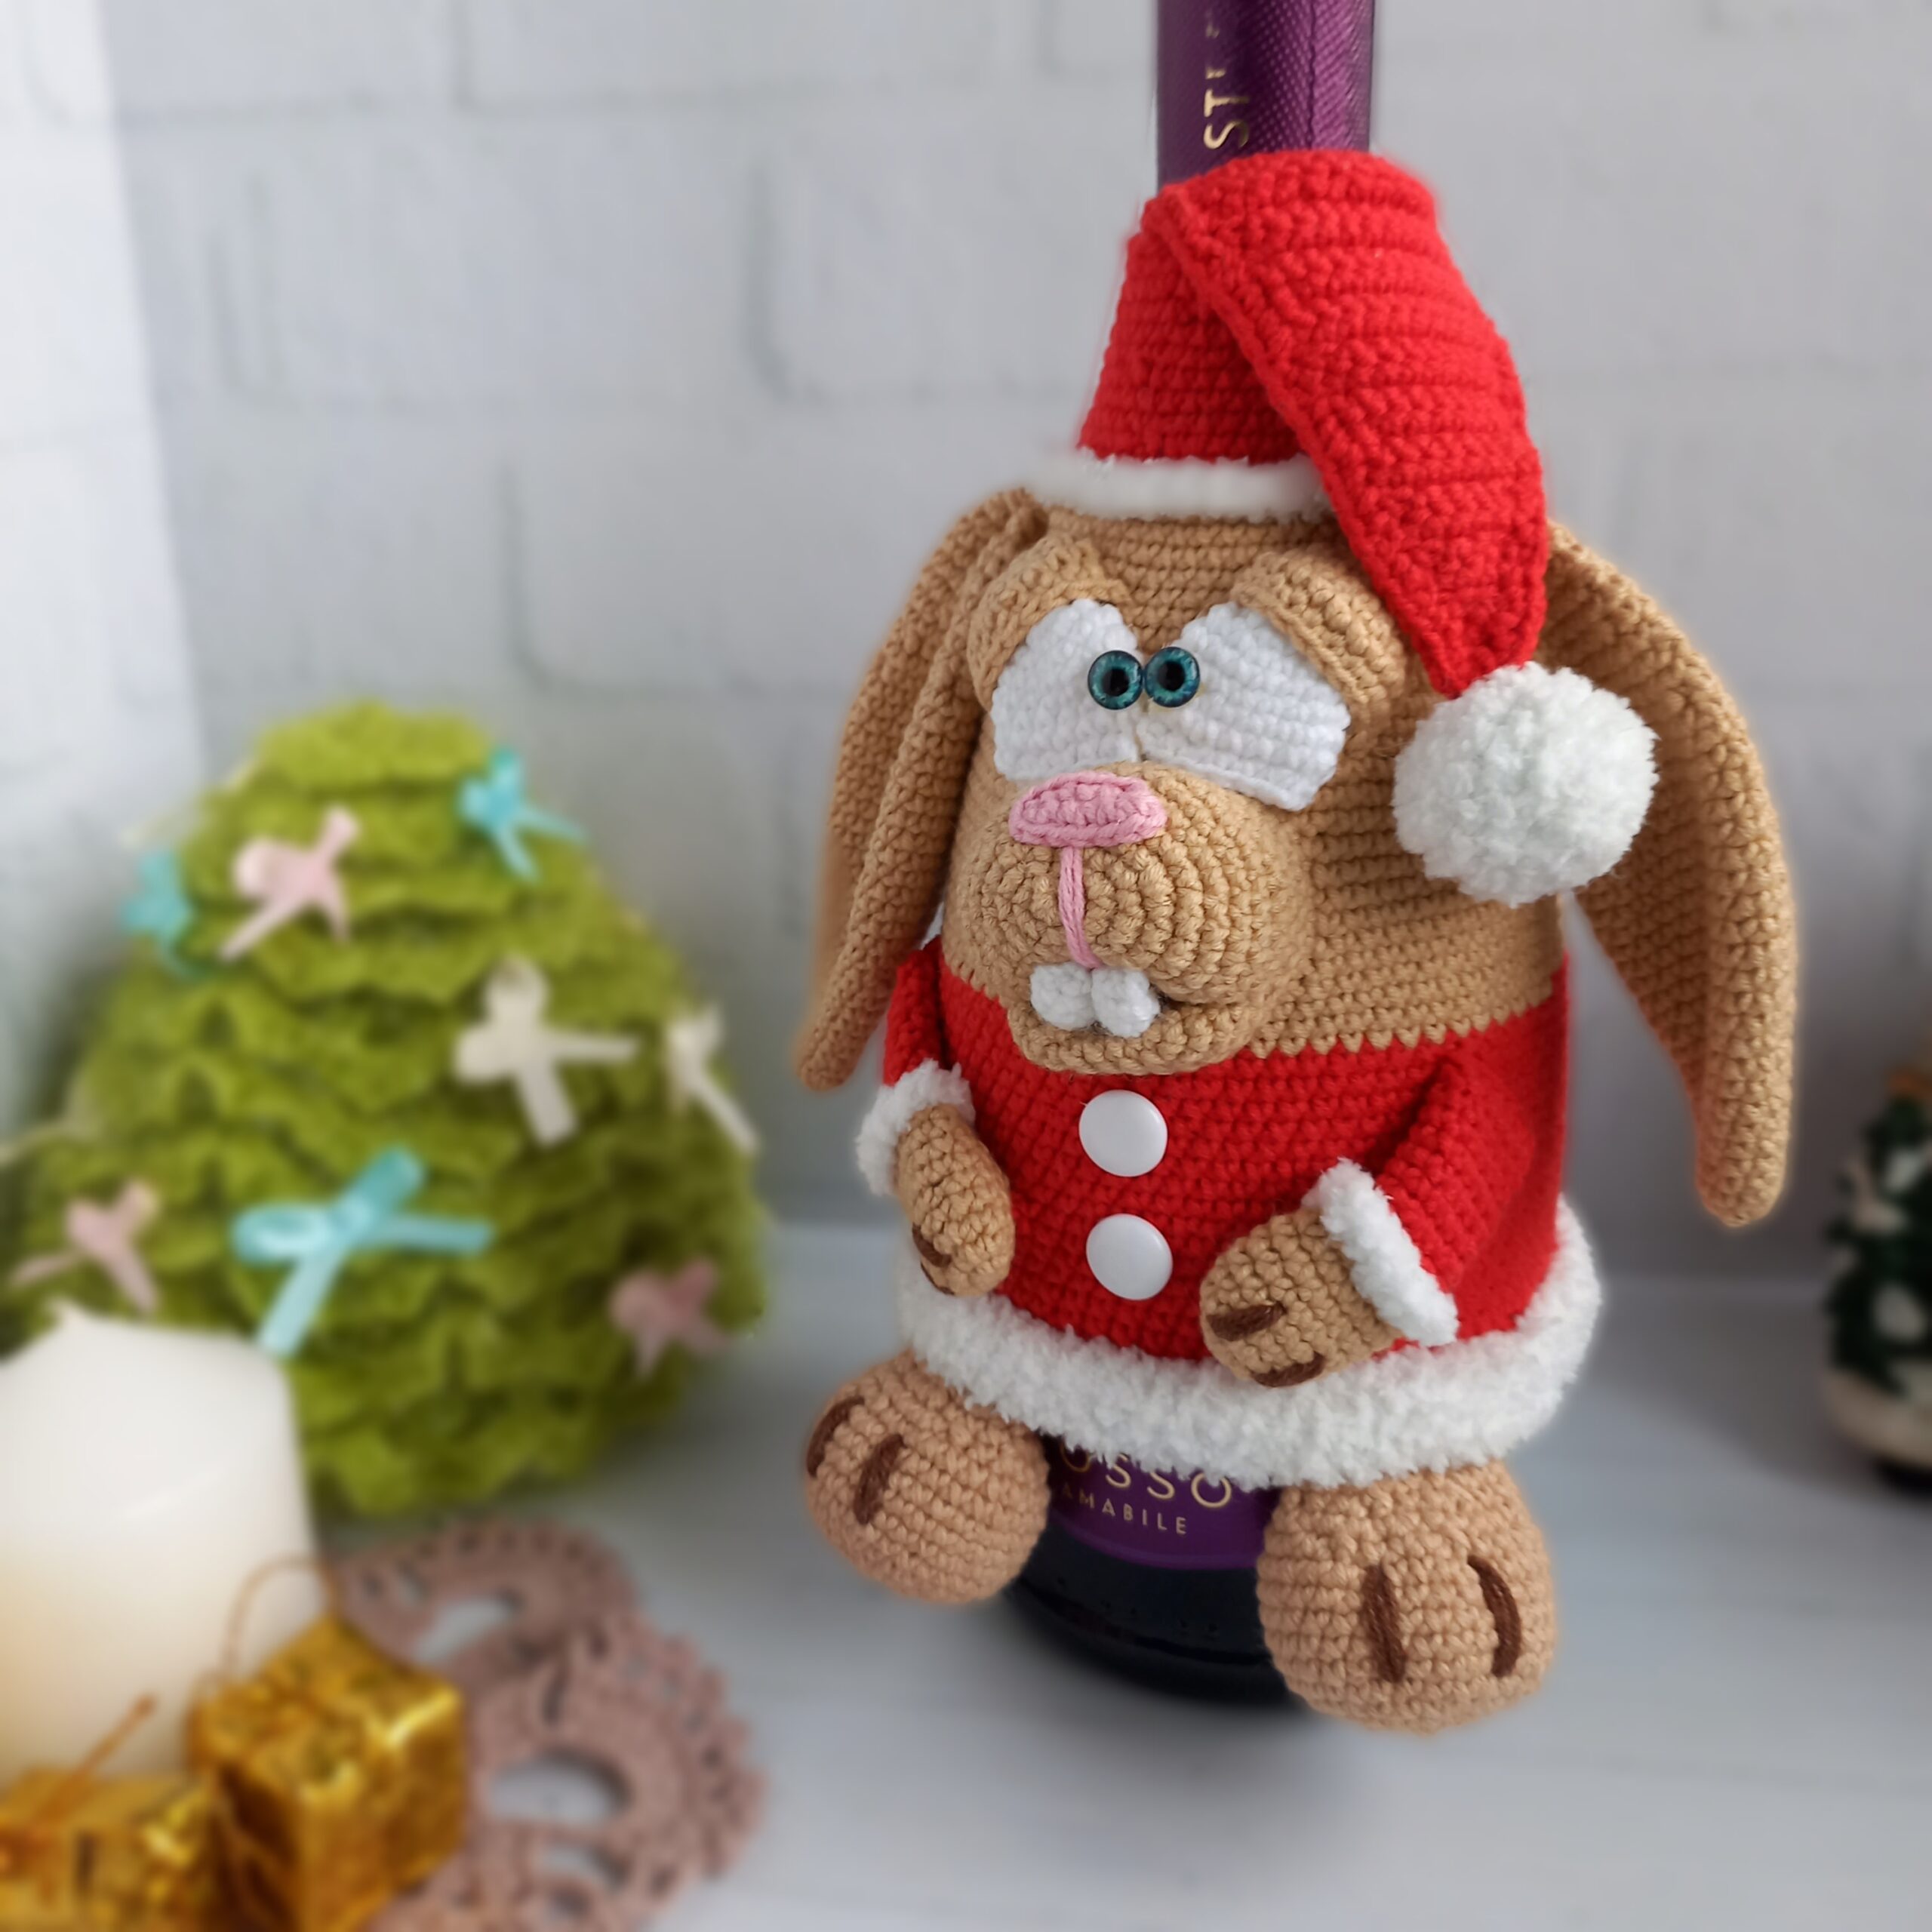 Do you like Eggdog? He's made with sparkly, white yarn, so you think he  needs to be Christmas themed? : r/crochet